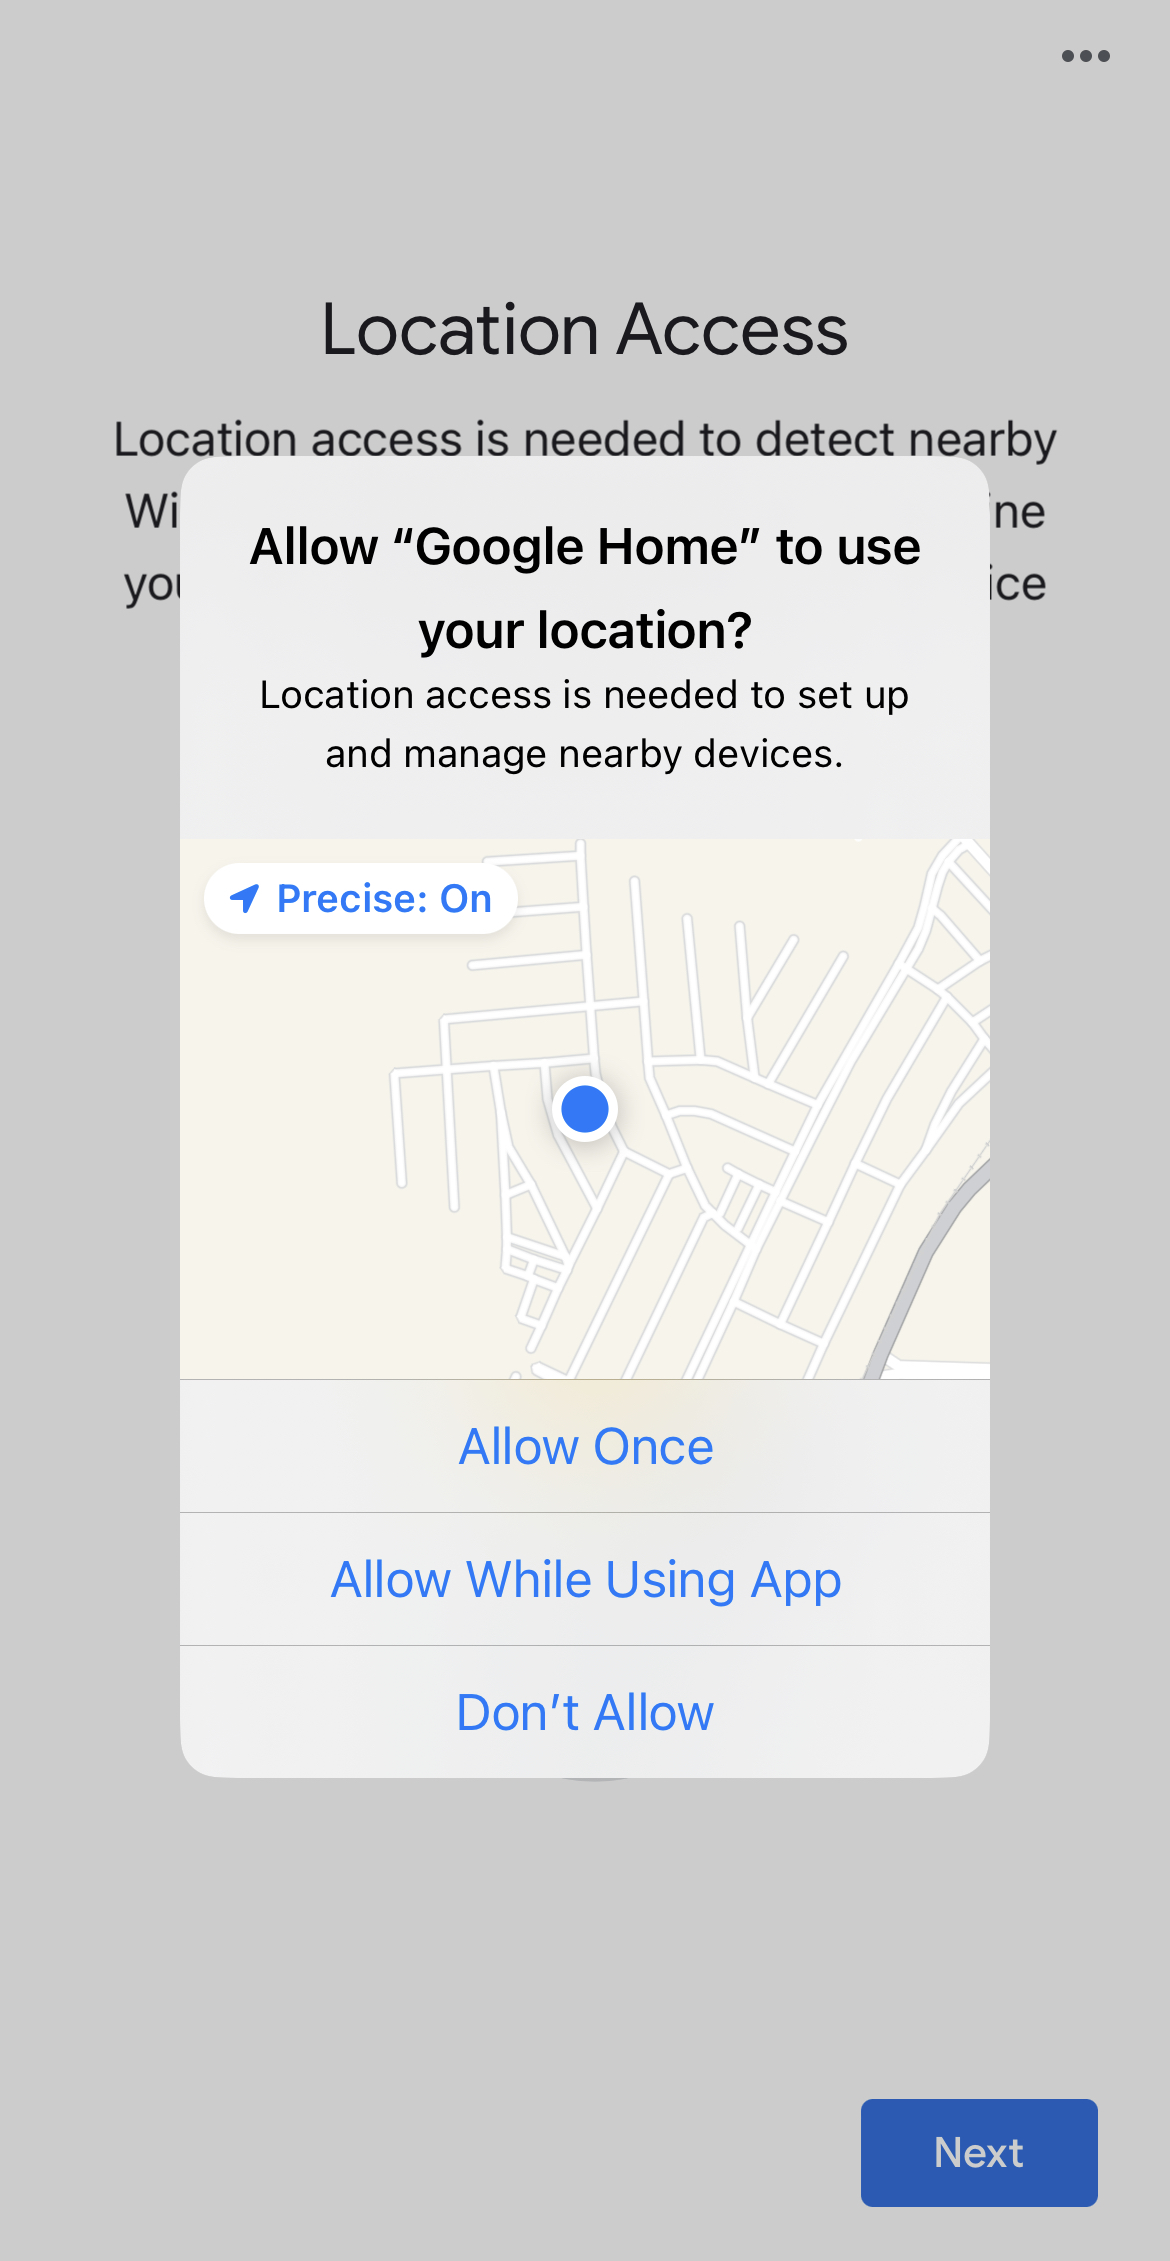 Giving Google Home permission to use your location